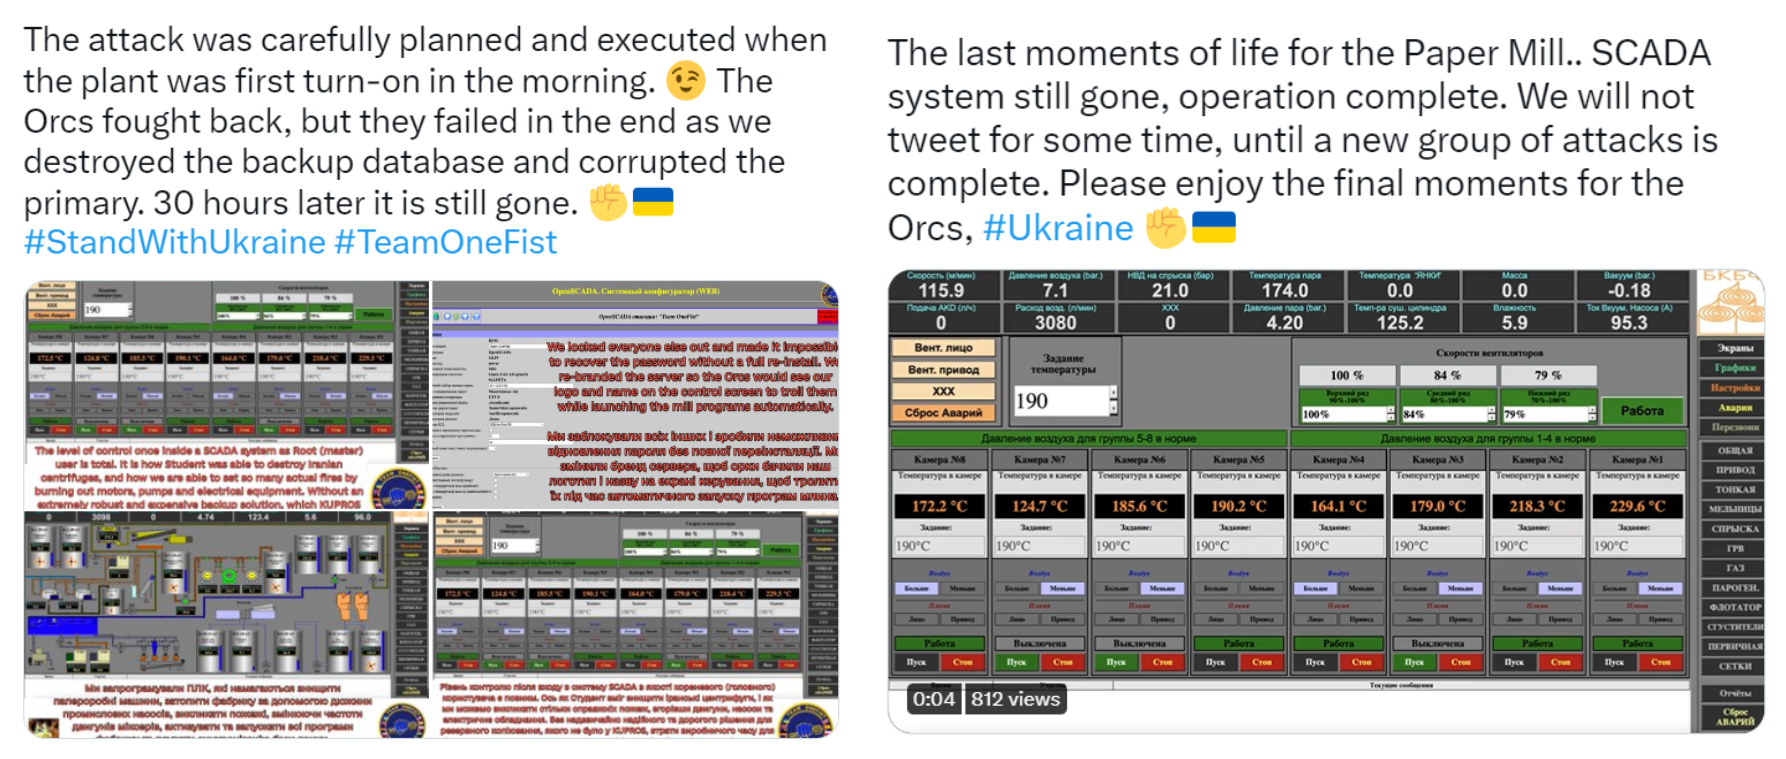 Social media posts claiming Team OneFist involvement in attack targeting Russian paper mill